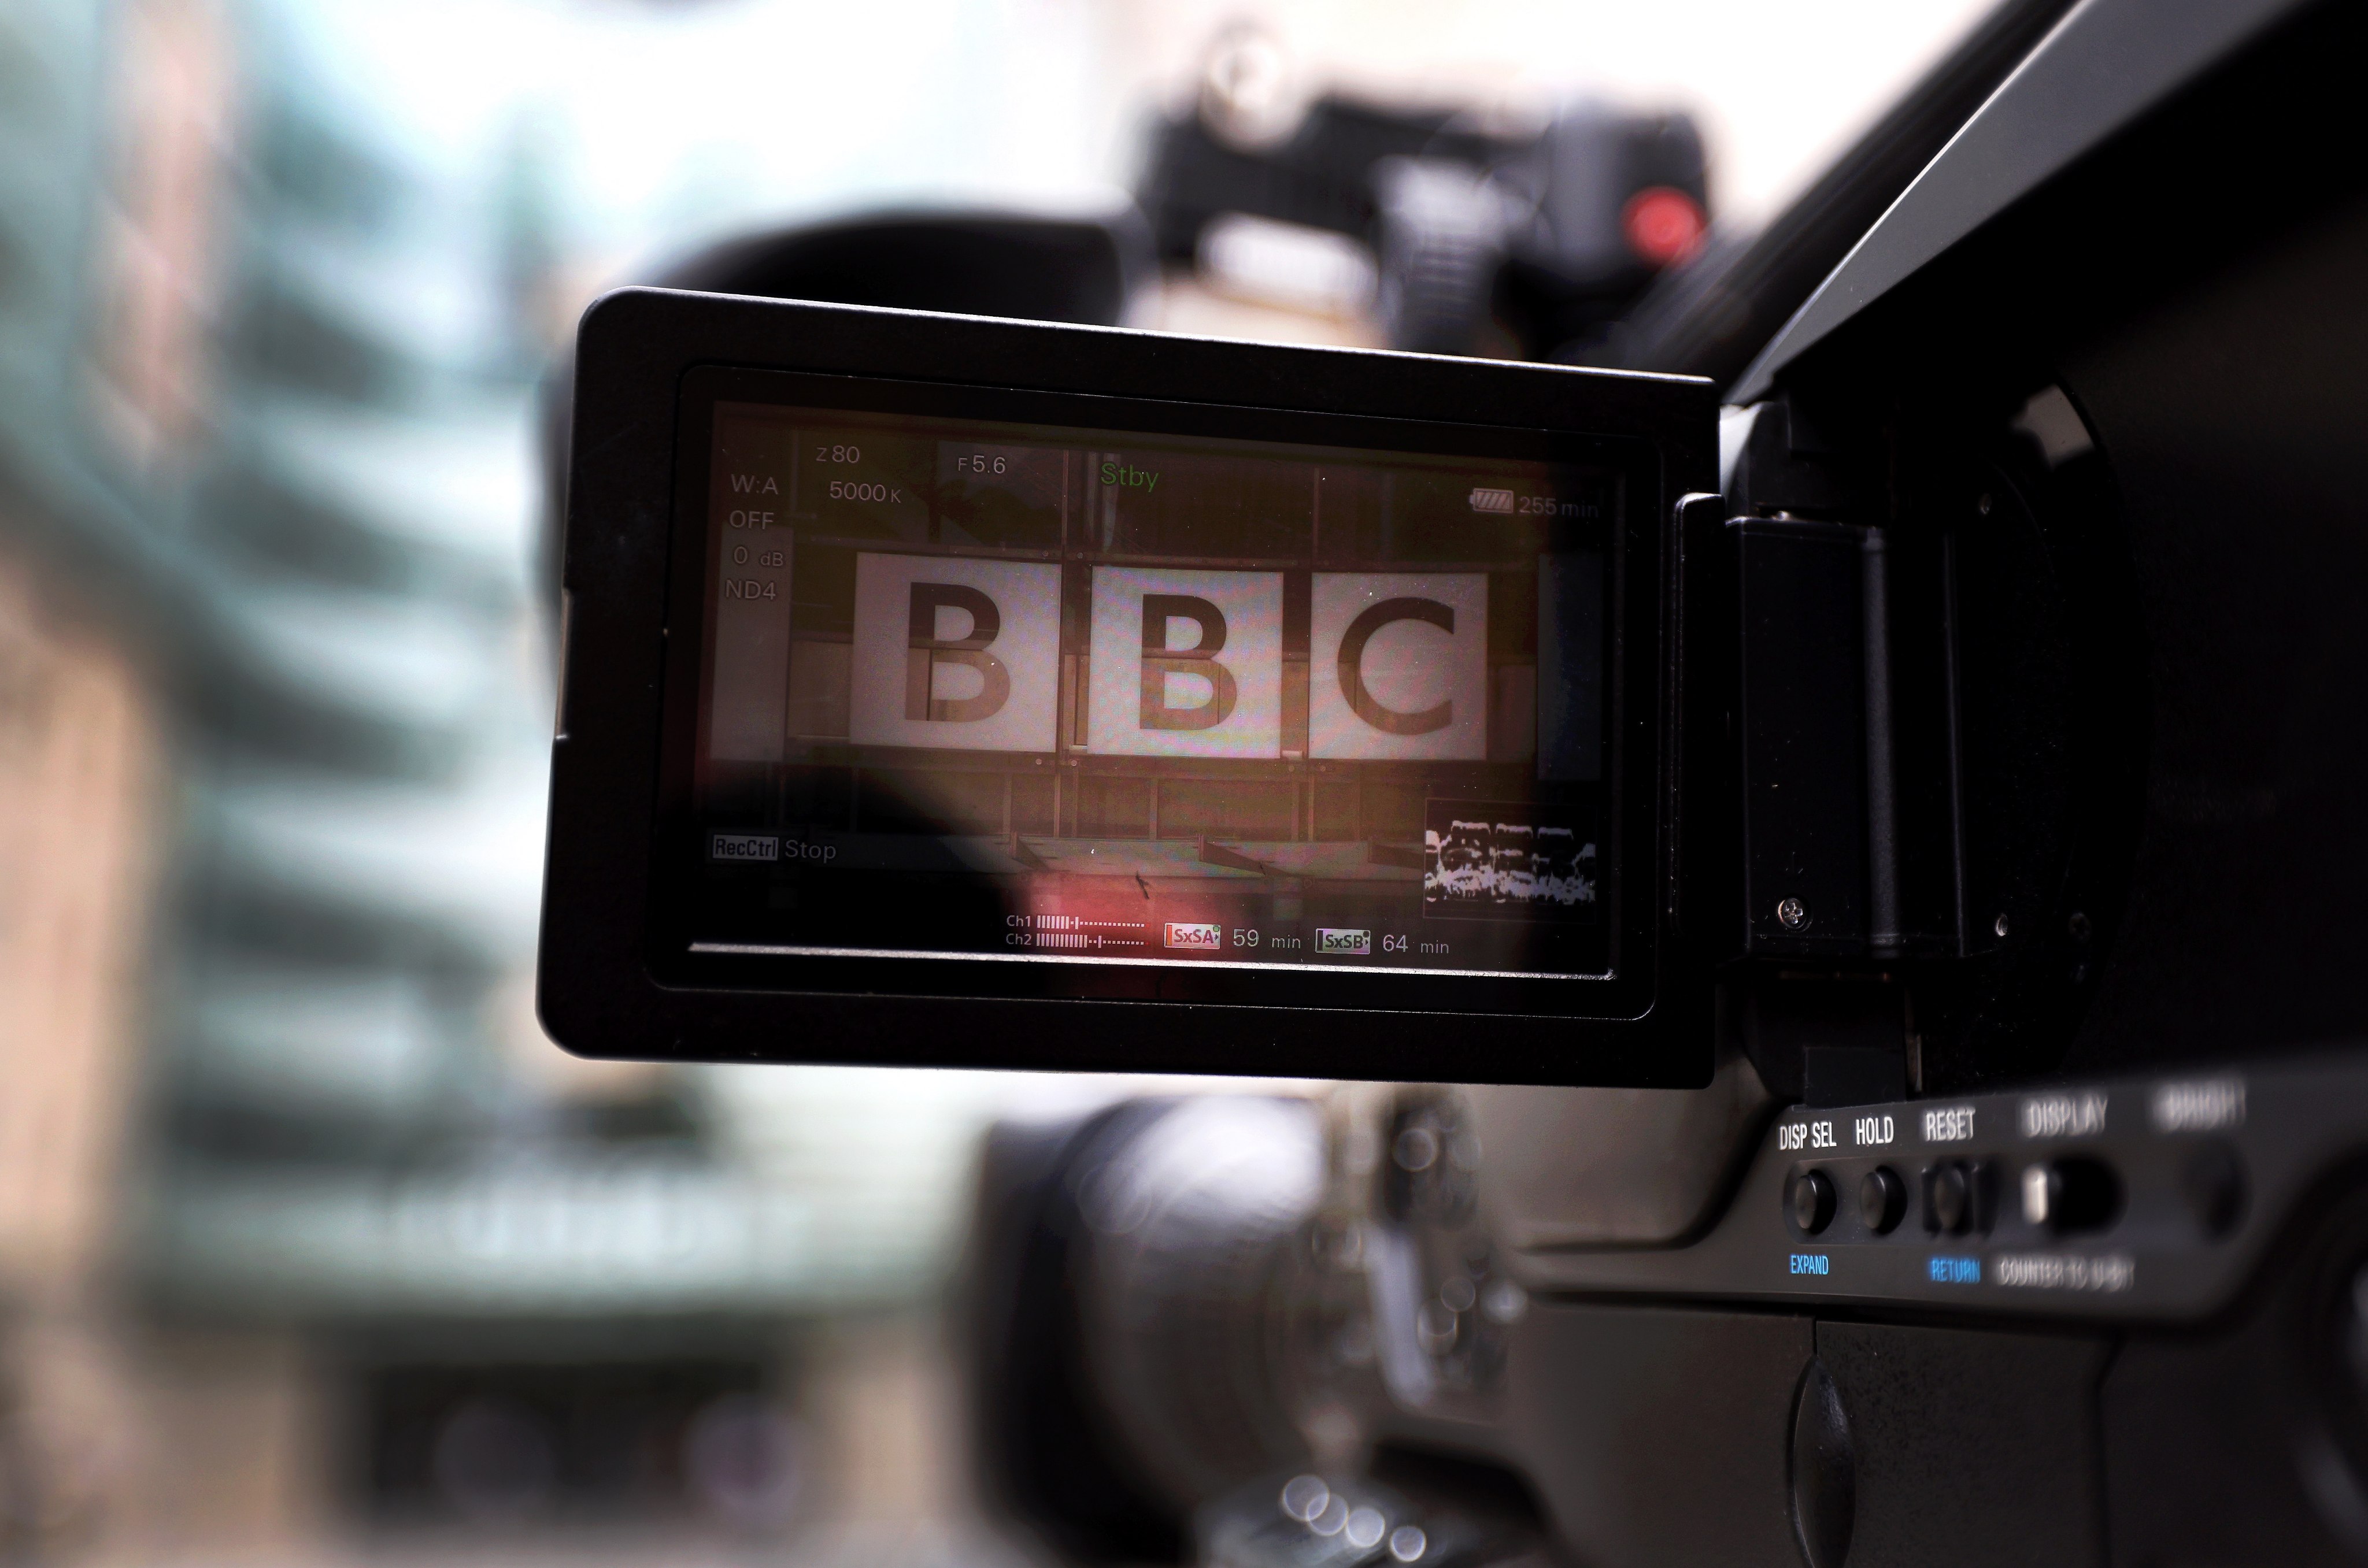 The BBC is funded by a licence fee paid by TV-watching households, but its chair is appointed by the government. Photo: EPA-EFE